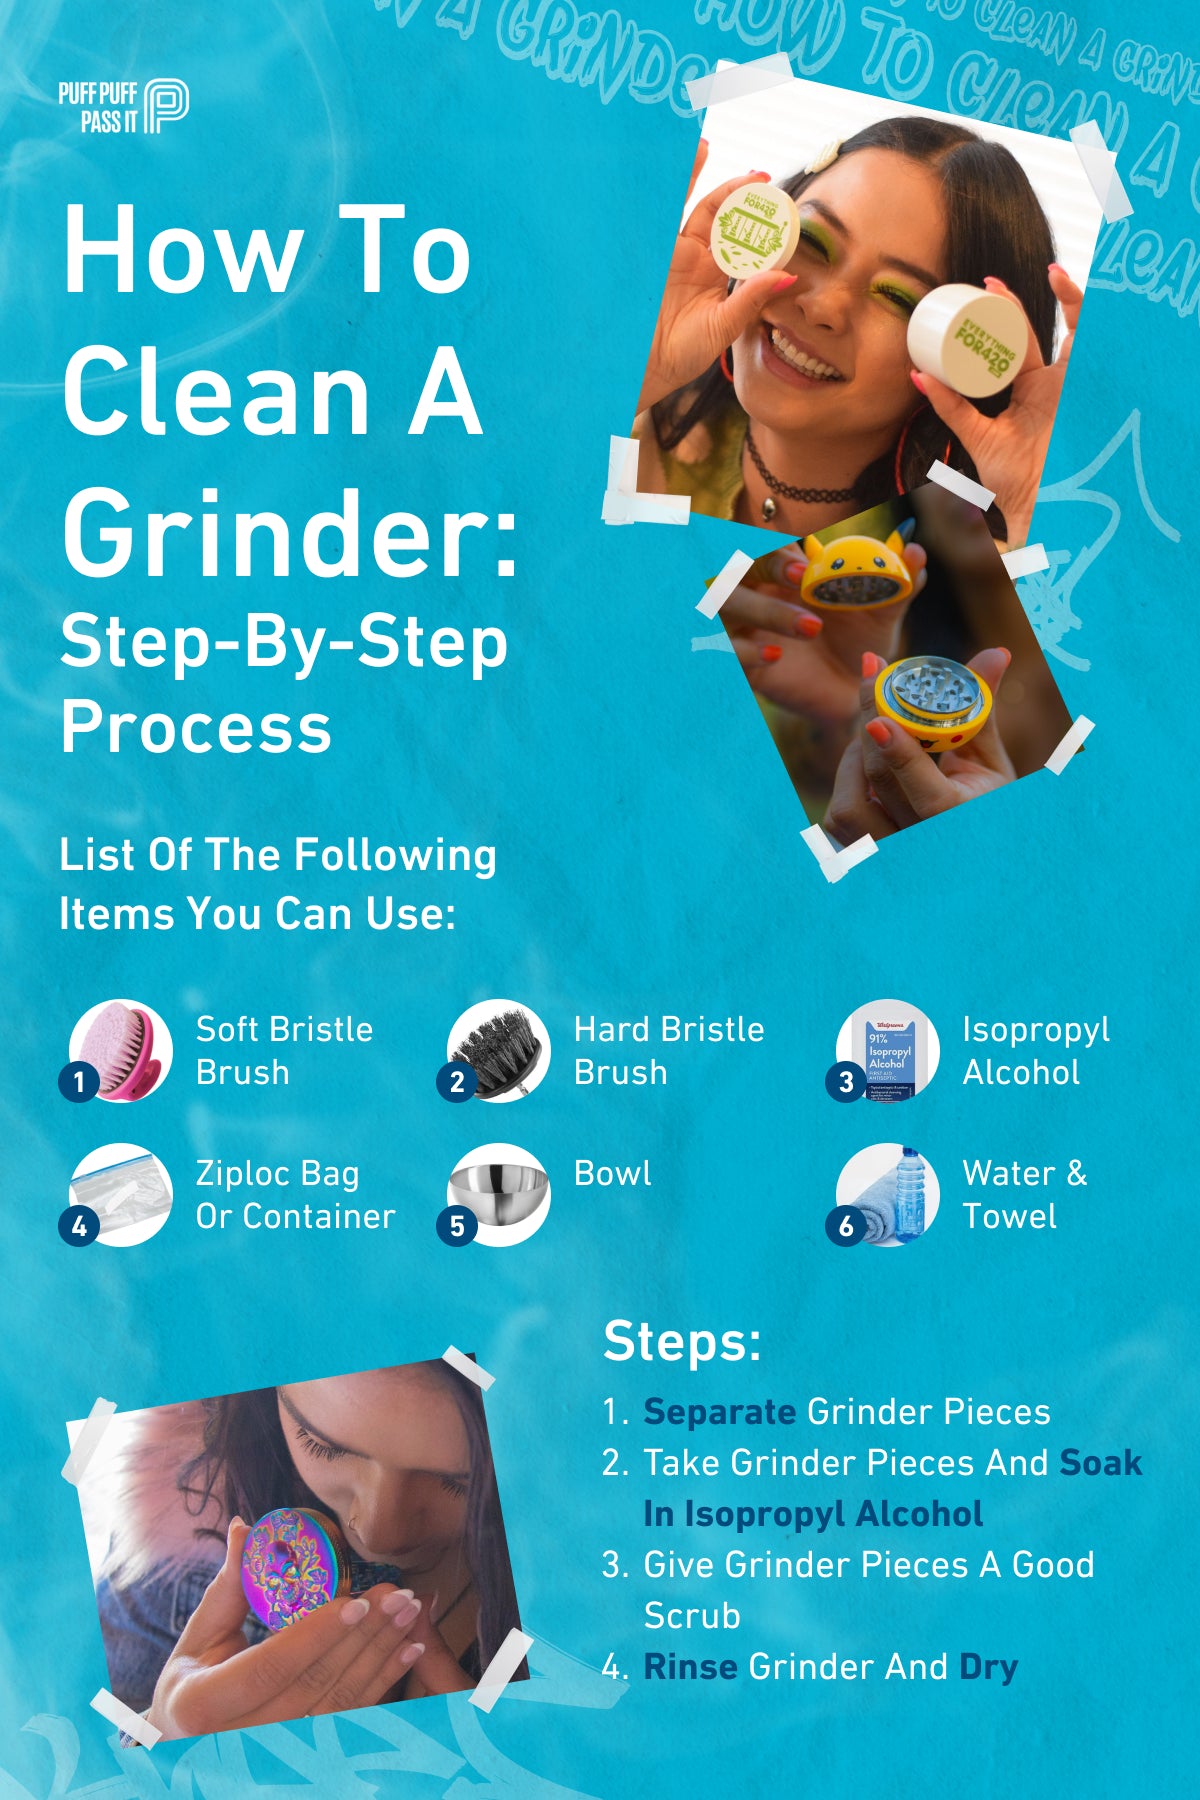 How to clean a grinder: step-by-step process